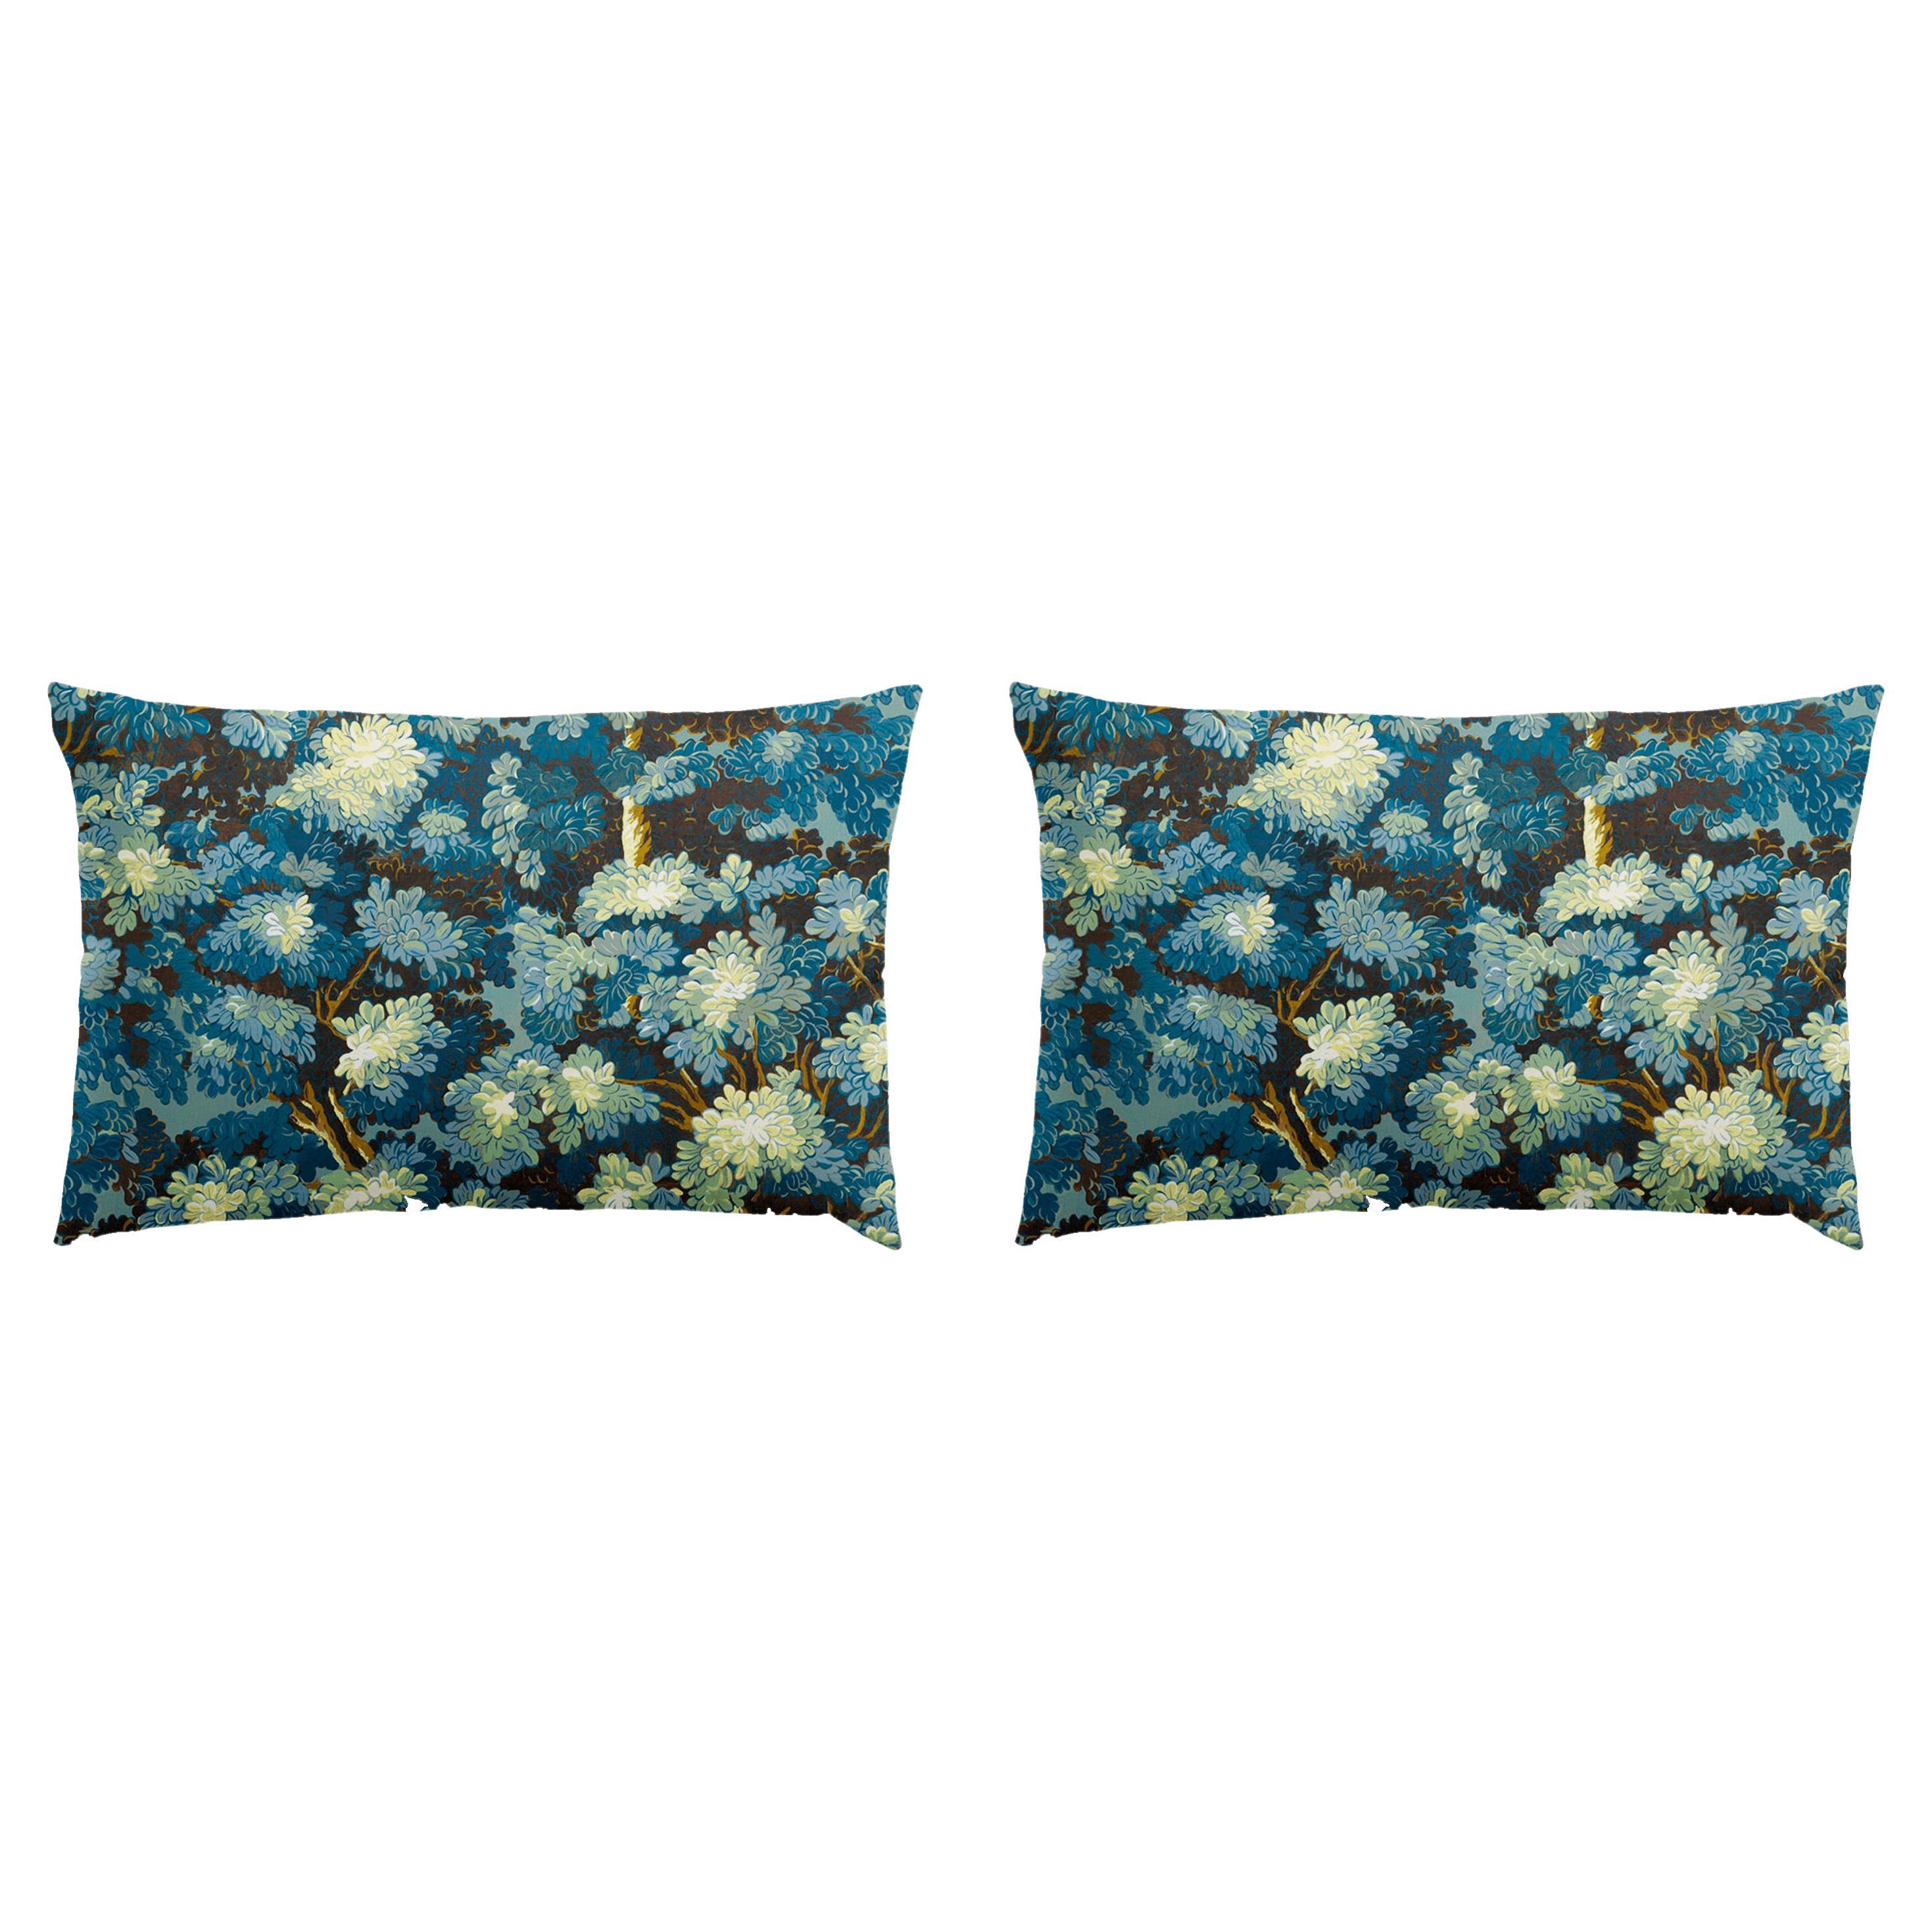 Pair of Linen Pillow Cushions - Joli Bois pattern - Designed and Made in Paris